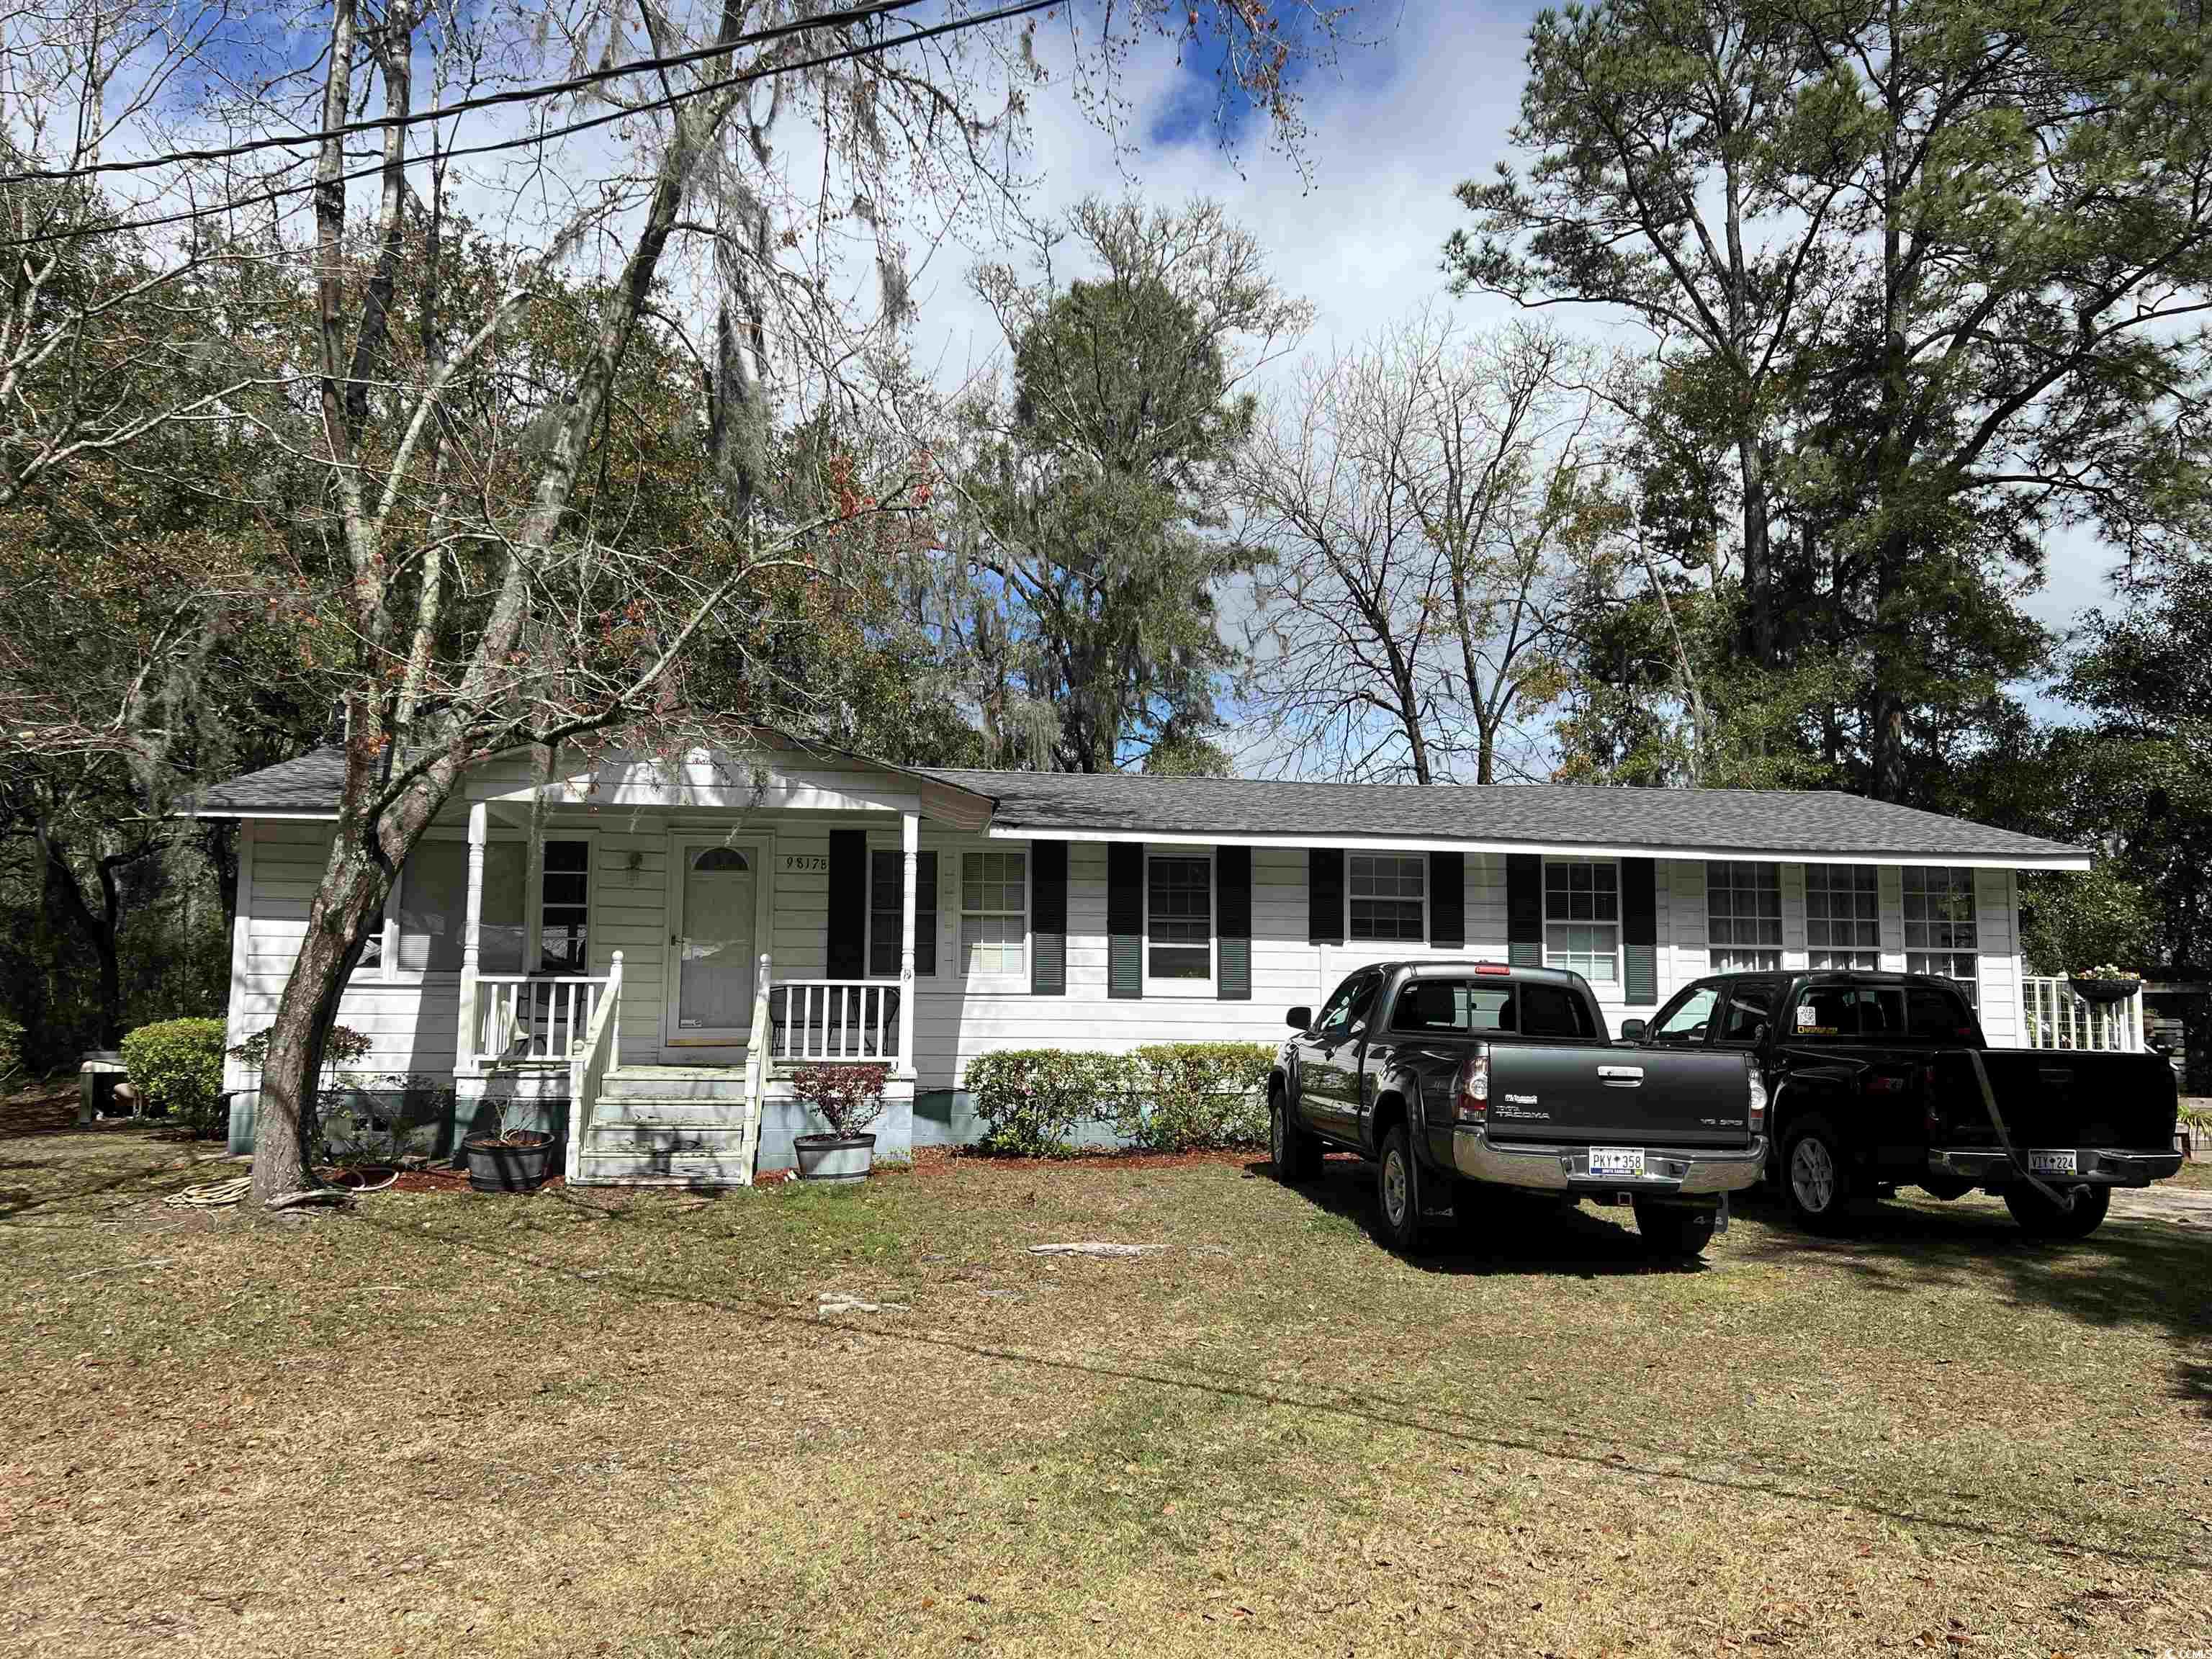 this 3 bedroom 2 bath house is in the heart of pawleys island.   a very nice wooded lot with room to subdivide.  this house has a lot of character and would make a great rental, primary residence, second home, or even a business.  centrally located to everything in pawleys island!  minutes from brookgreen gardens, huntington beach state park, hobcaw barony and 10 minutes from georgetown.  this is sure to get attention so make your appointment today!